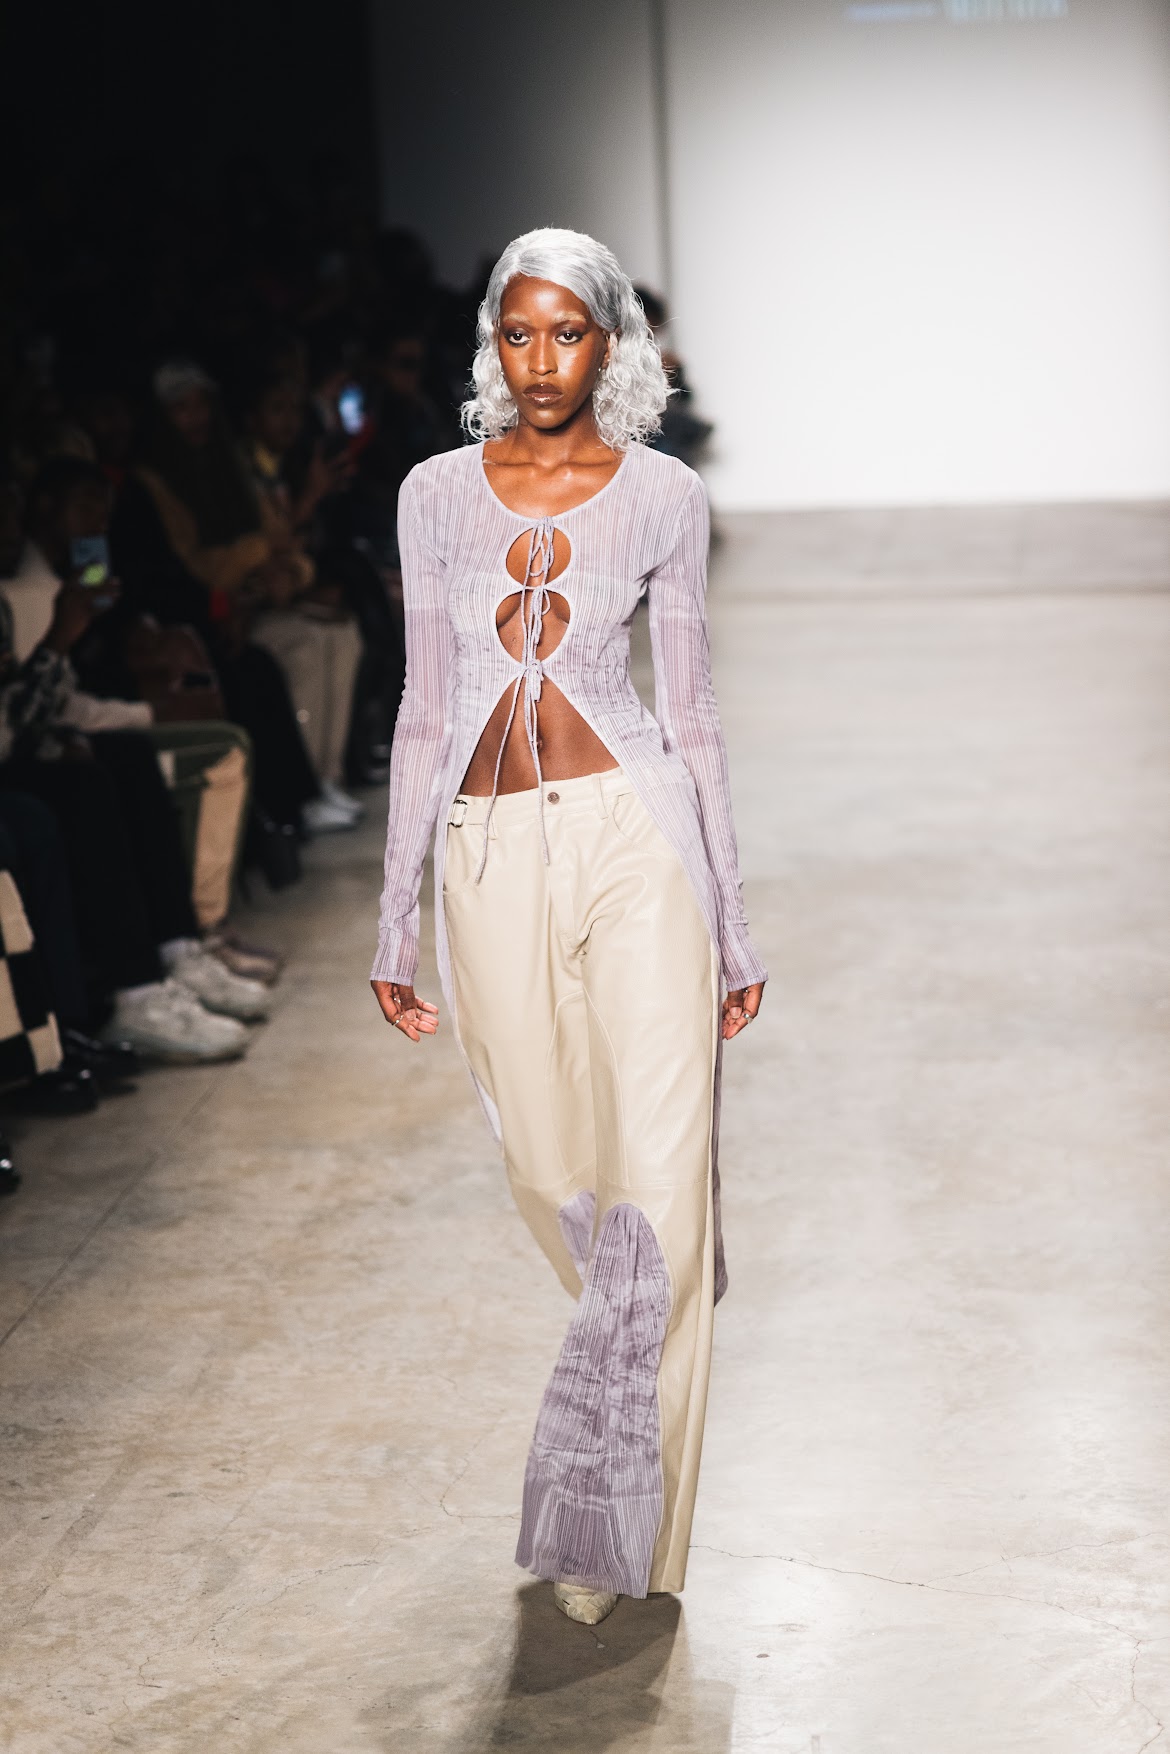 Ru by Rupal Takes Downtown Brooklyn by Storm for NYFW